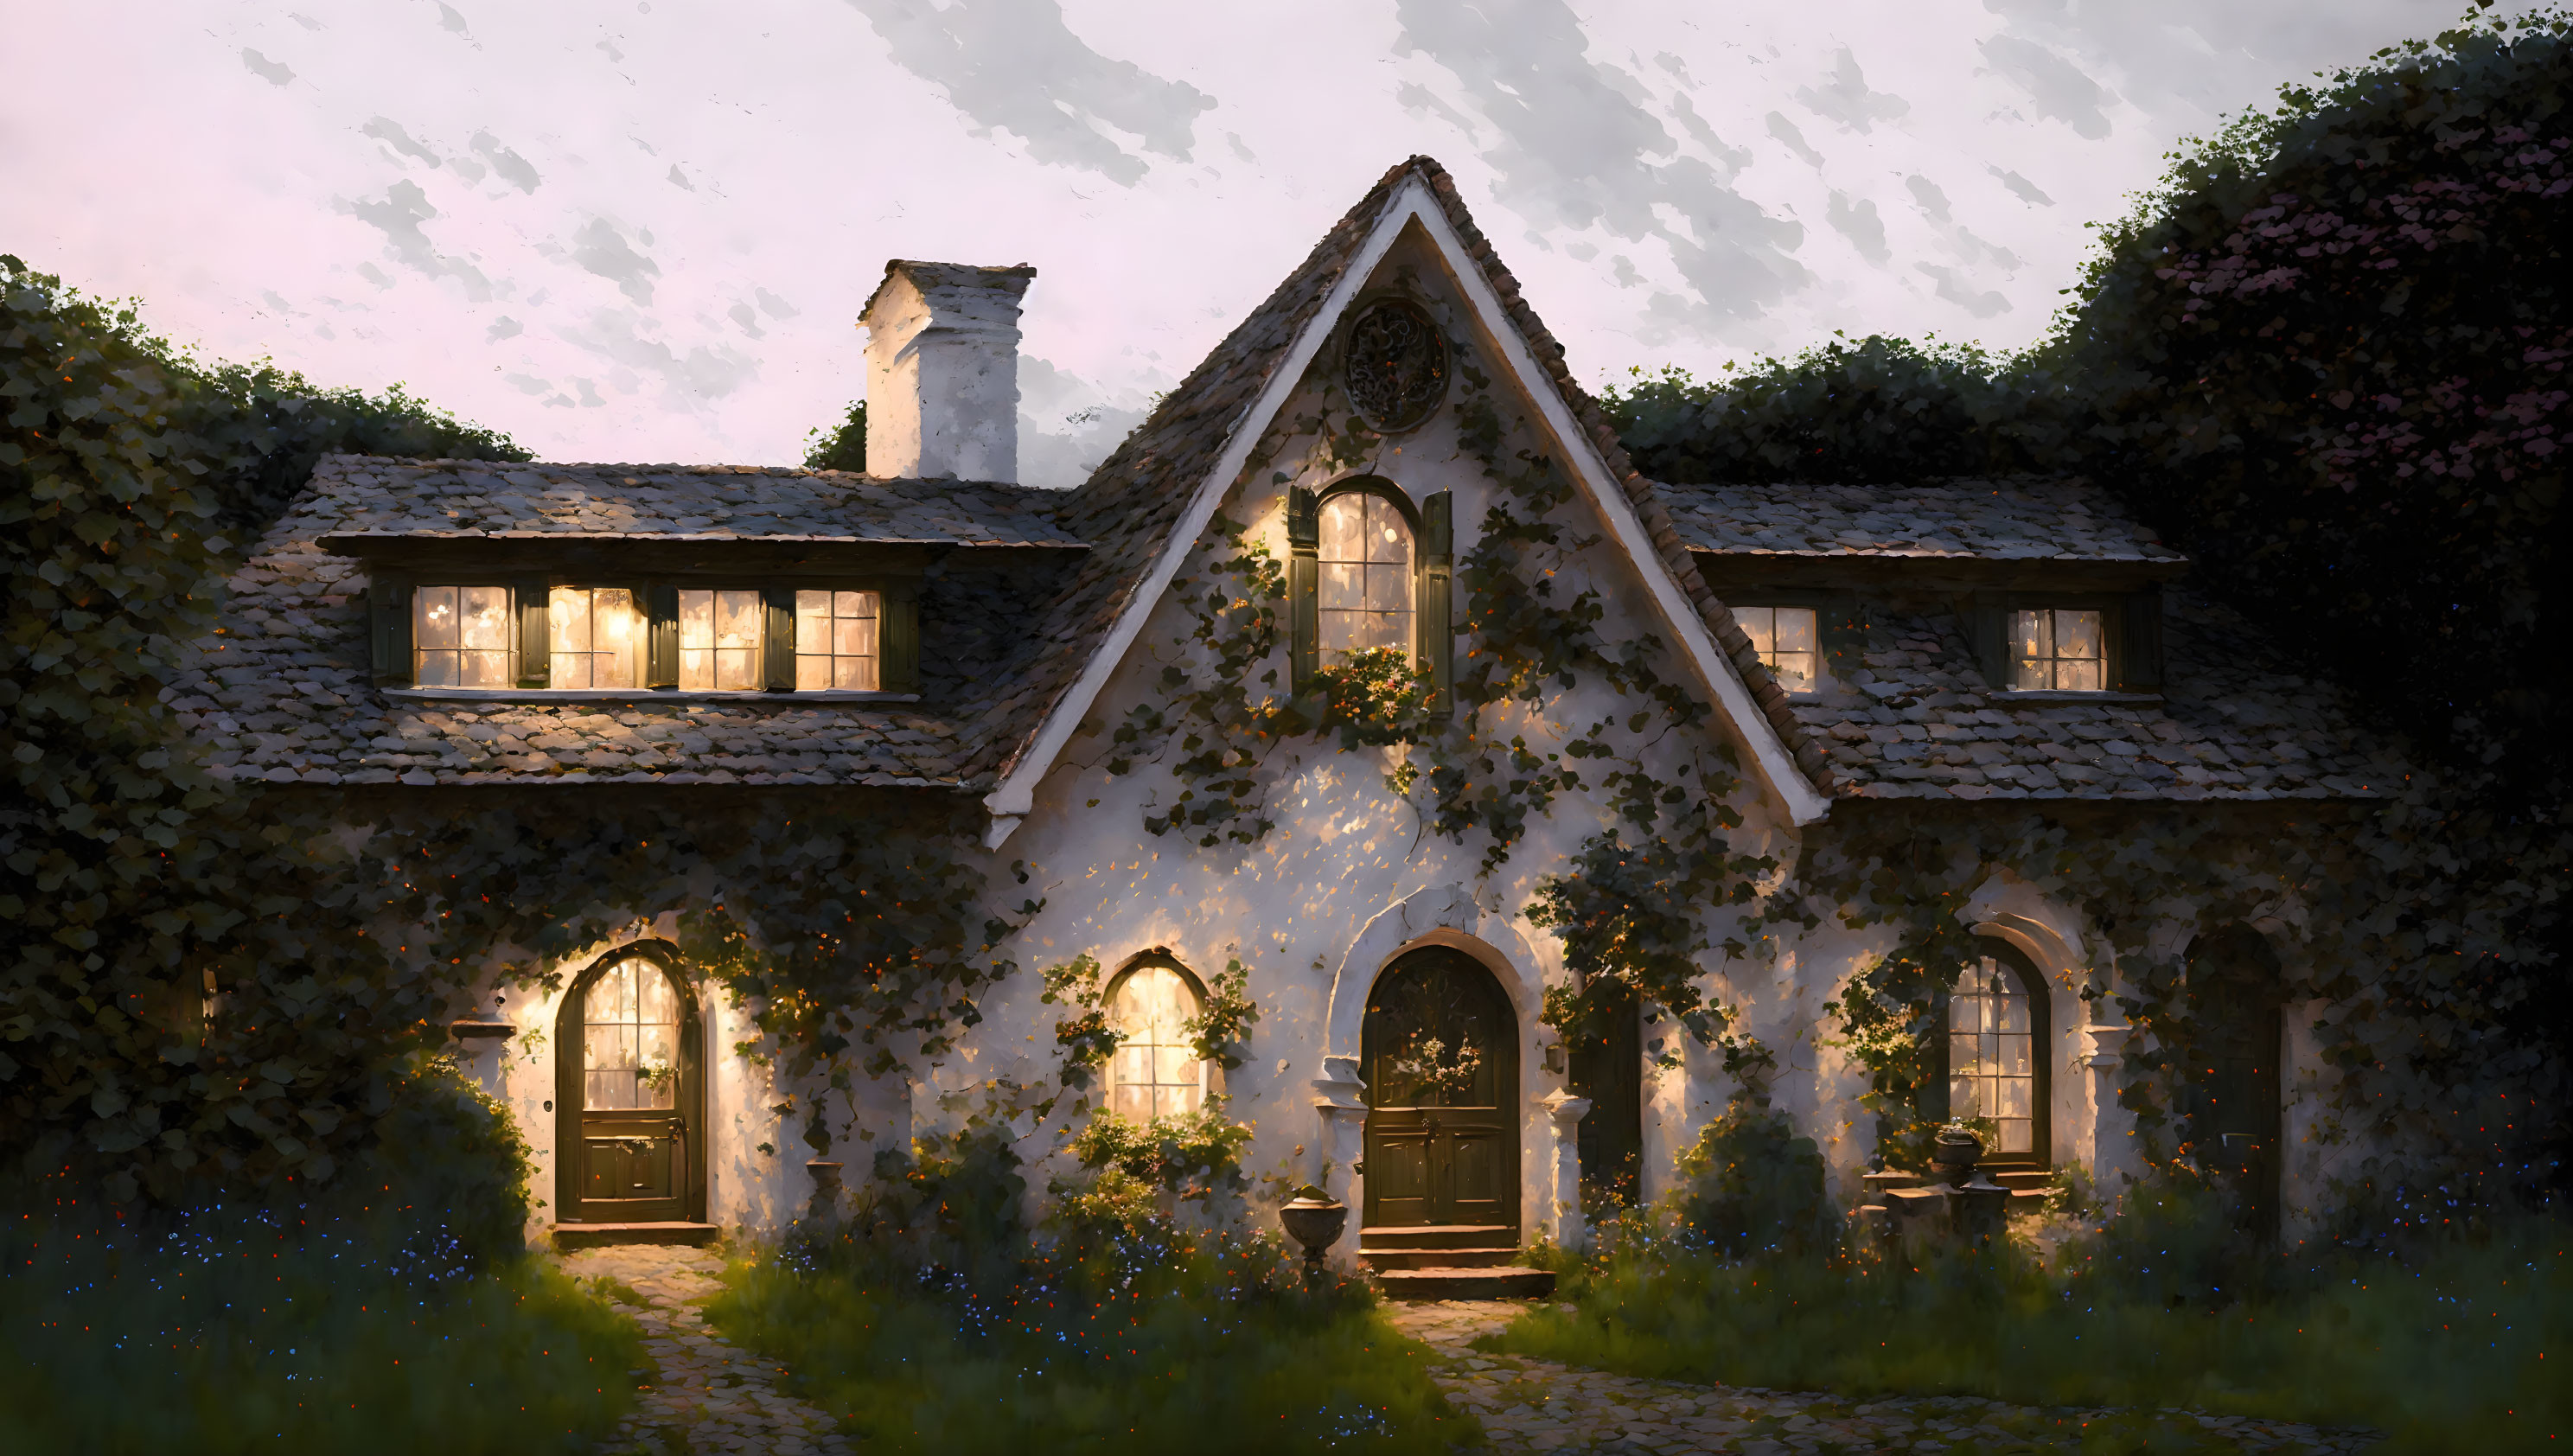 Cozy ivy-covered cottage at dusk with glowing windows and colorful flowers